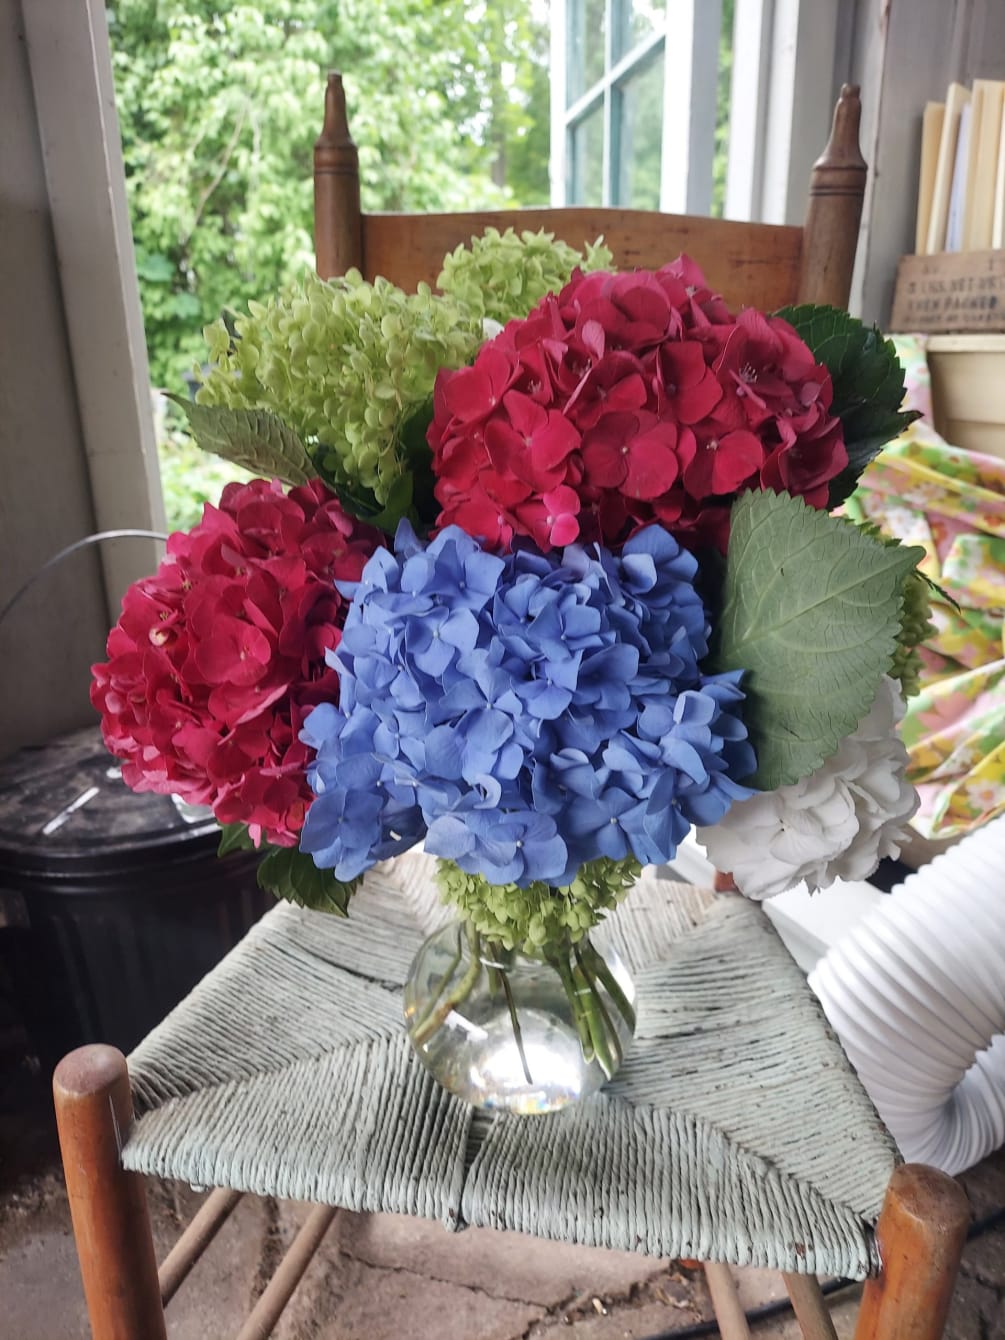 Holy Hydrangea!  Big, bold and beautiful in a variety of colors